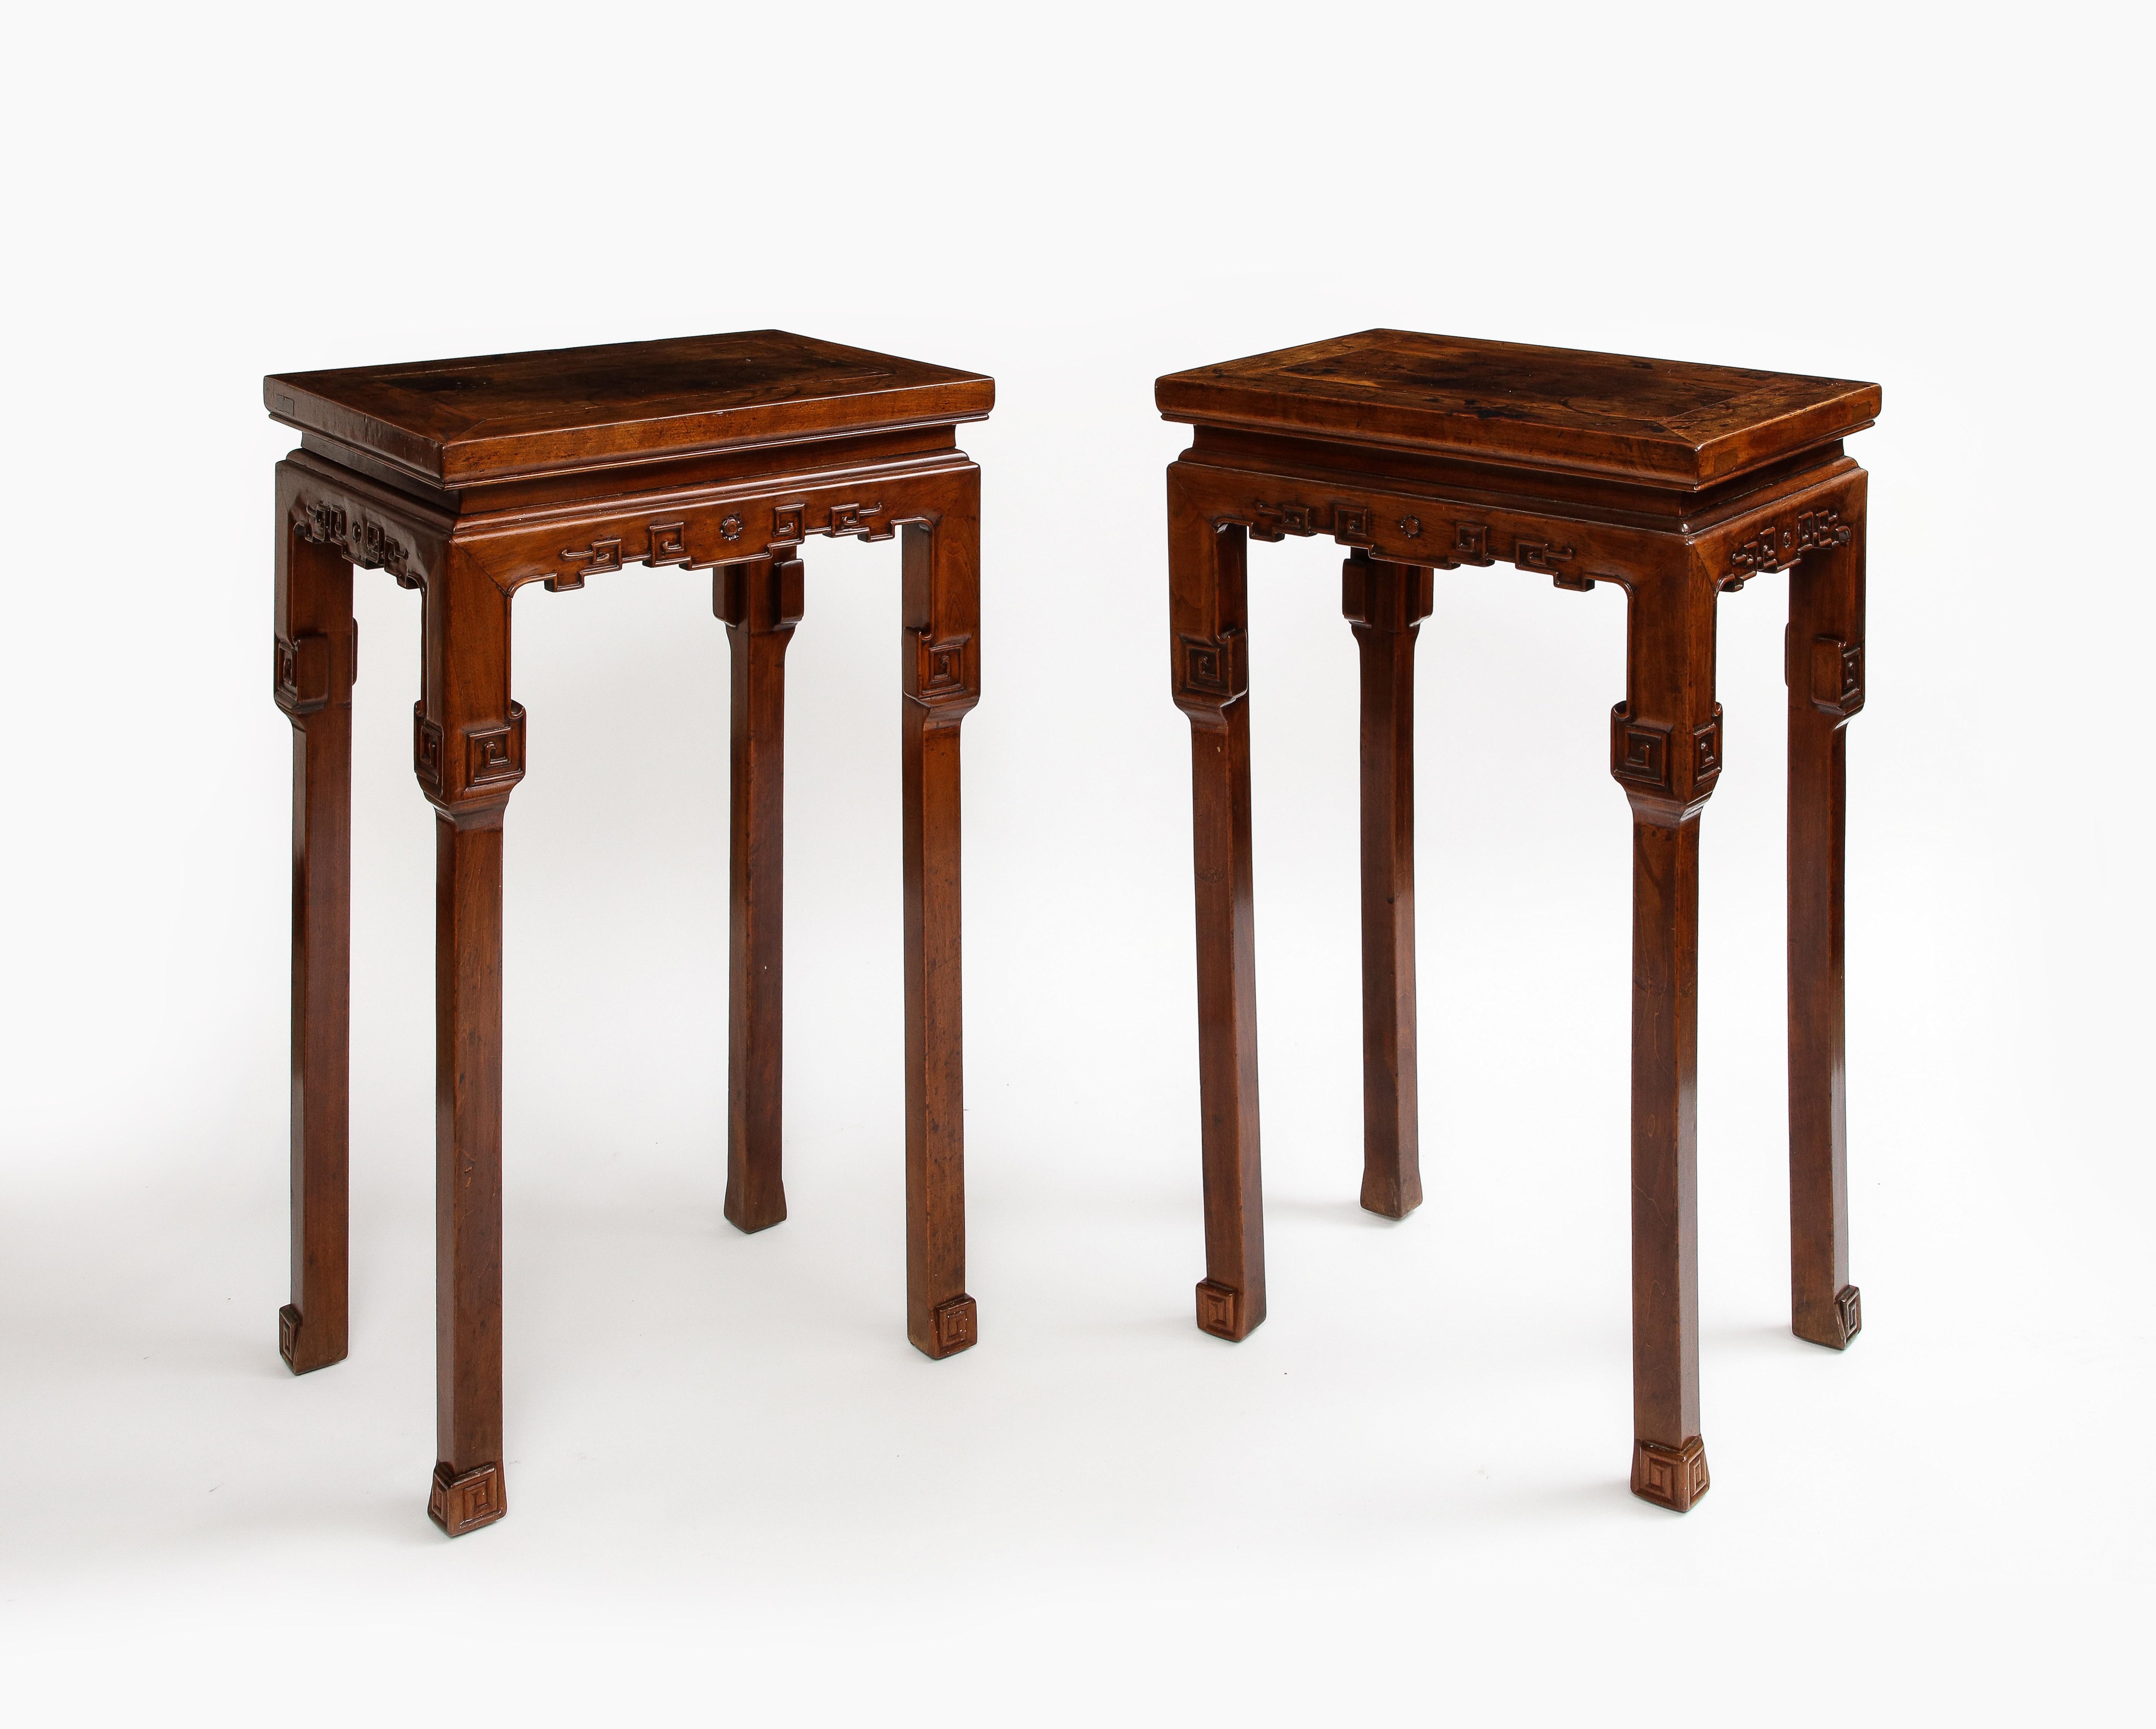 Wood A Pair of 19th Century Qing Dynasty Chinese Carved Hardwood Pedestals For Sale